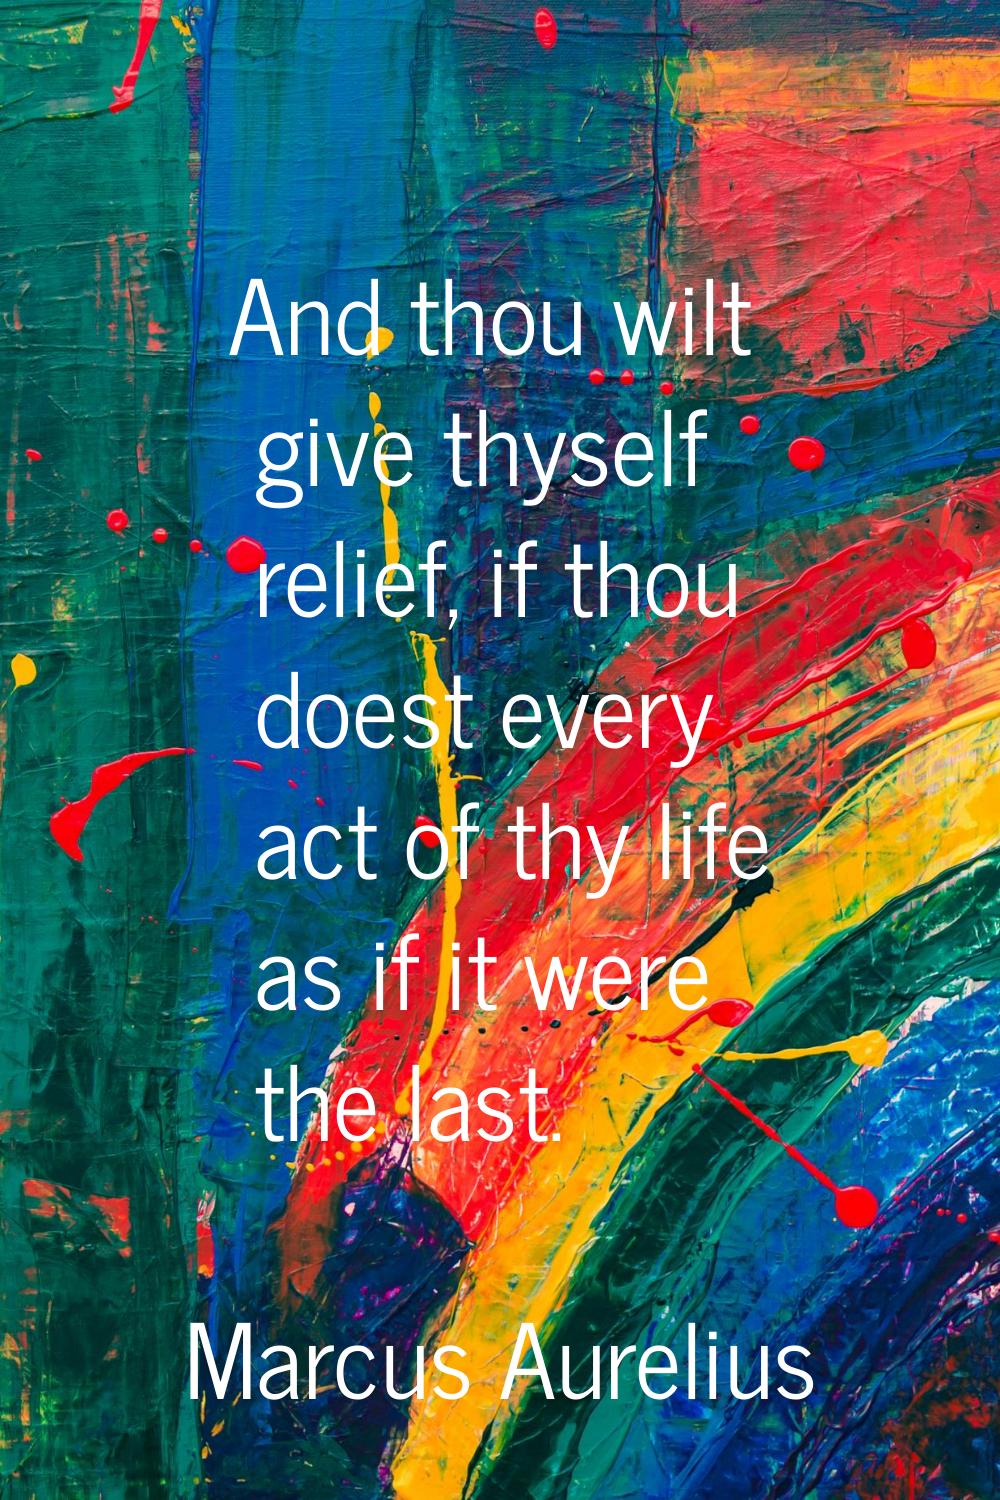 And thou wilt give thyself relief, if thou doest every act of thy life as if it were the last.